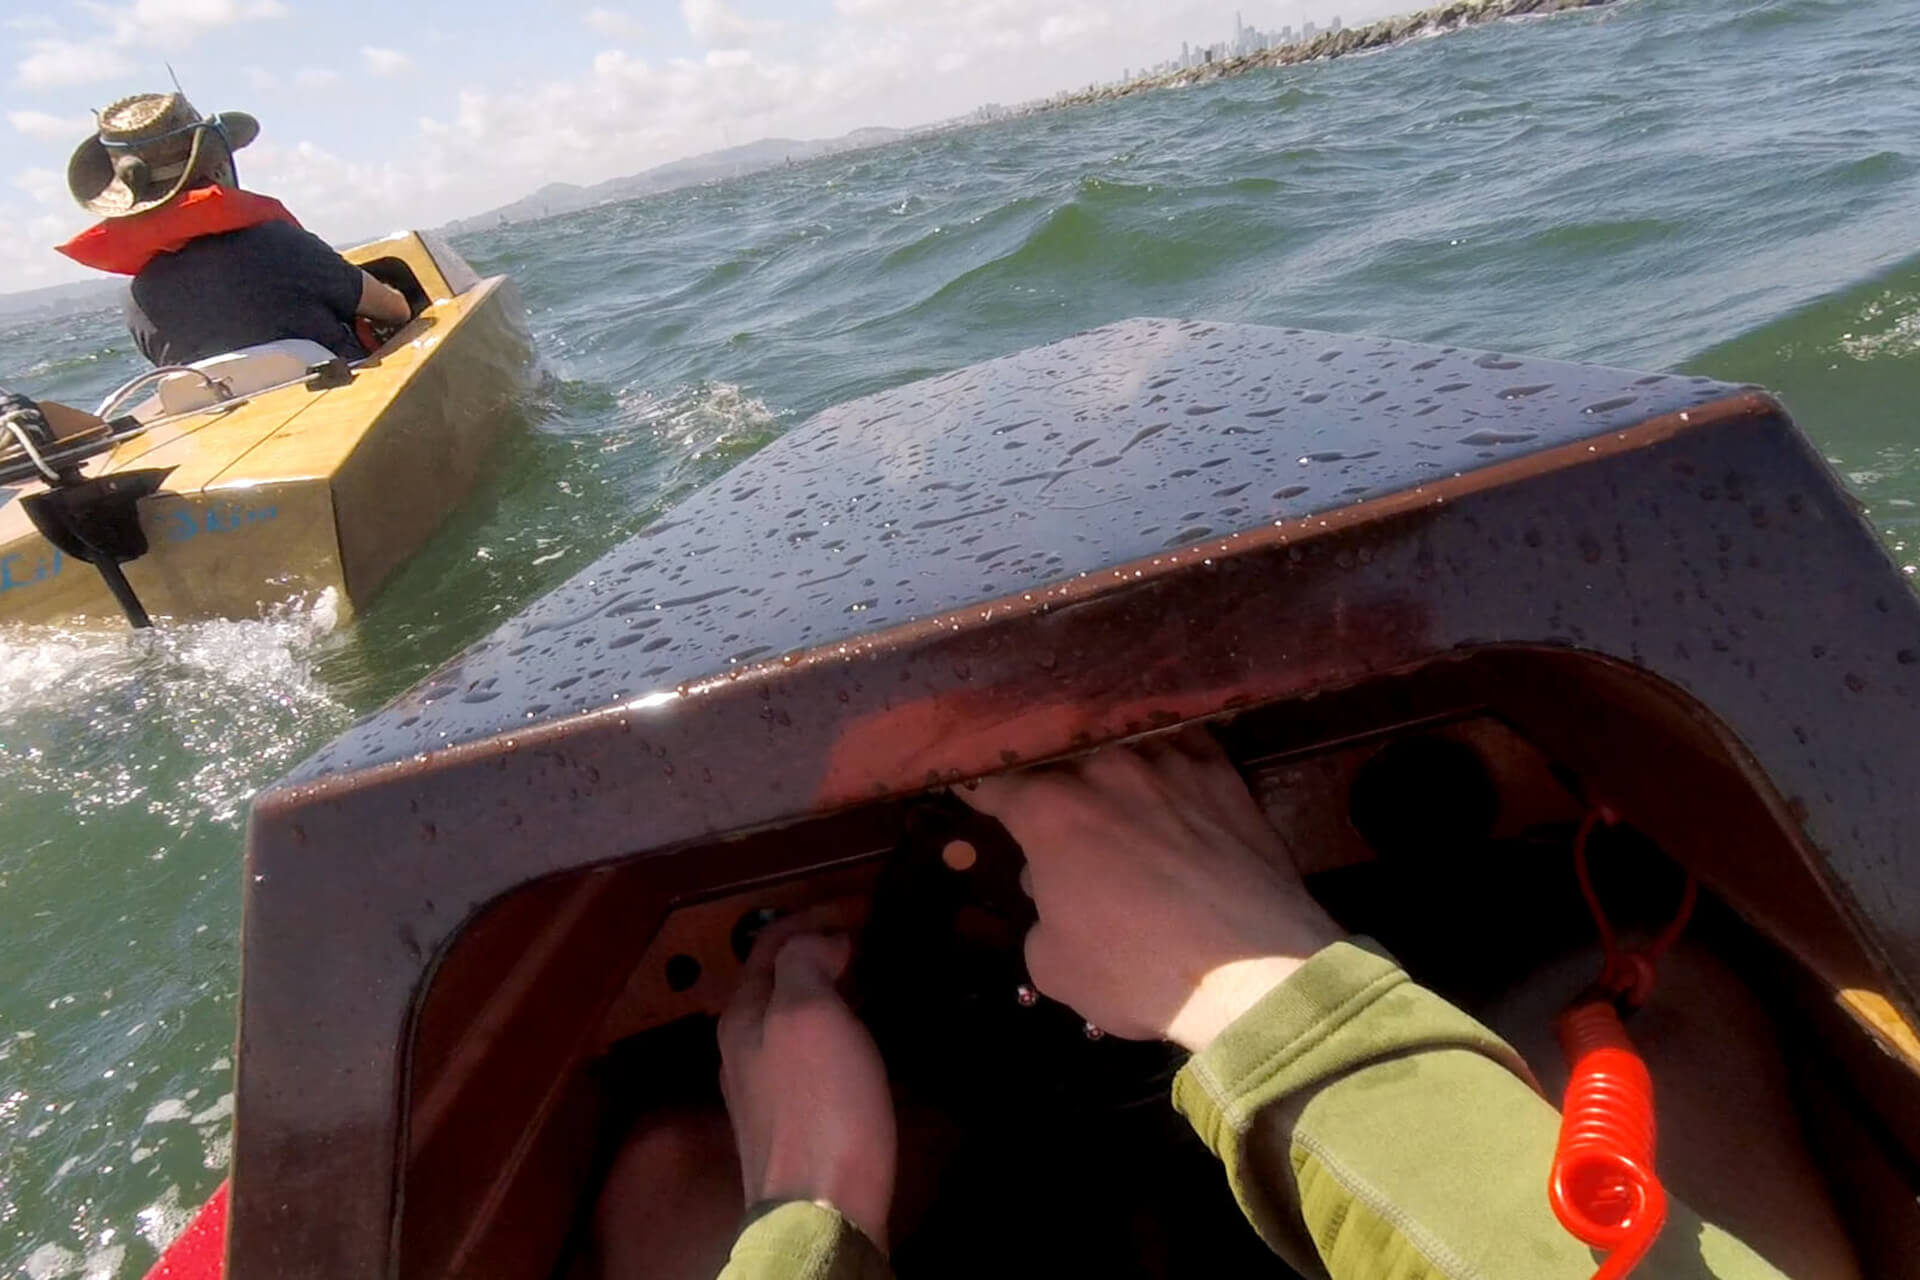 A first-person view of driving the mini boat